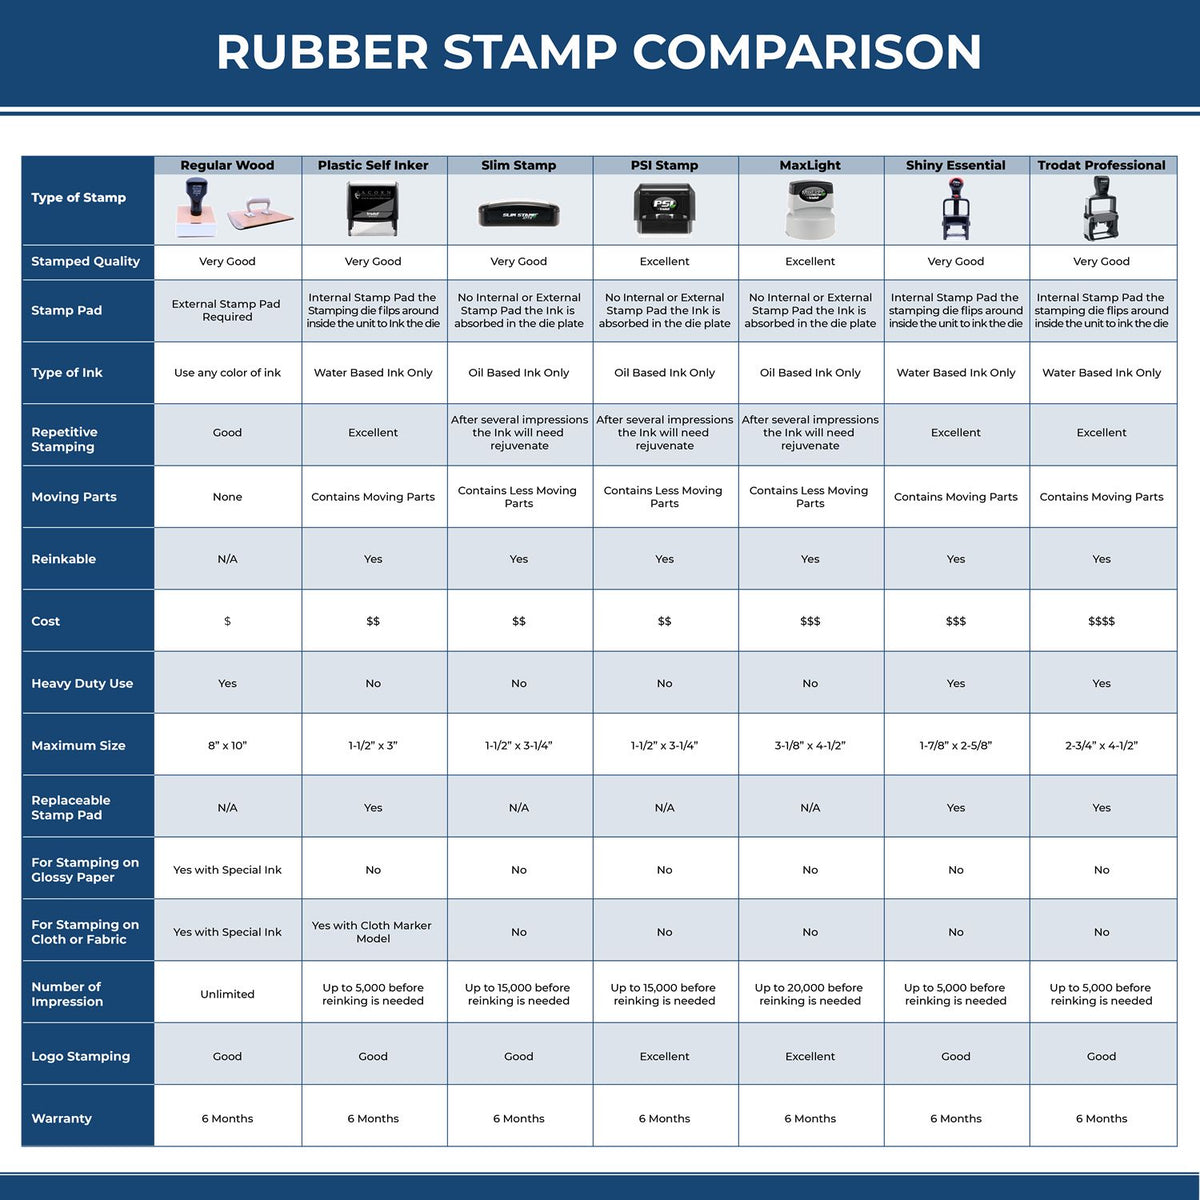 Large Standard Mail Stacked Rubber Stamp 5574R Rubber Stamp Comparison